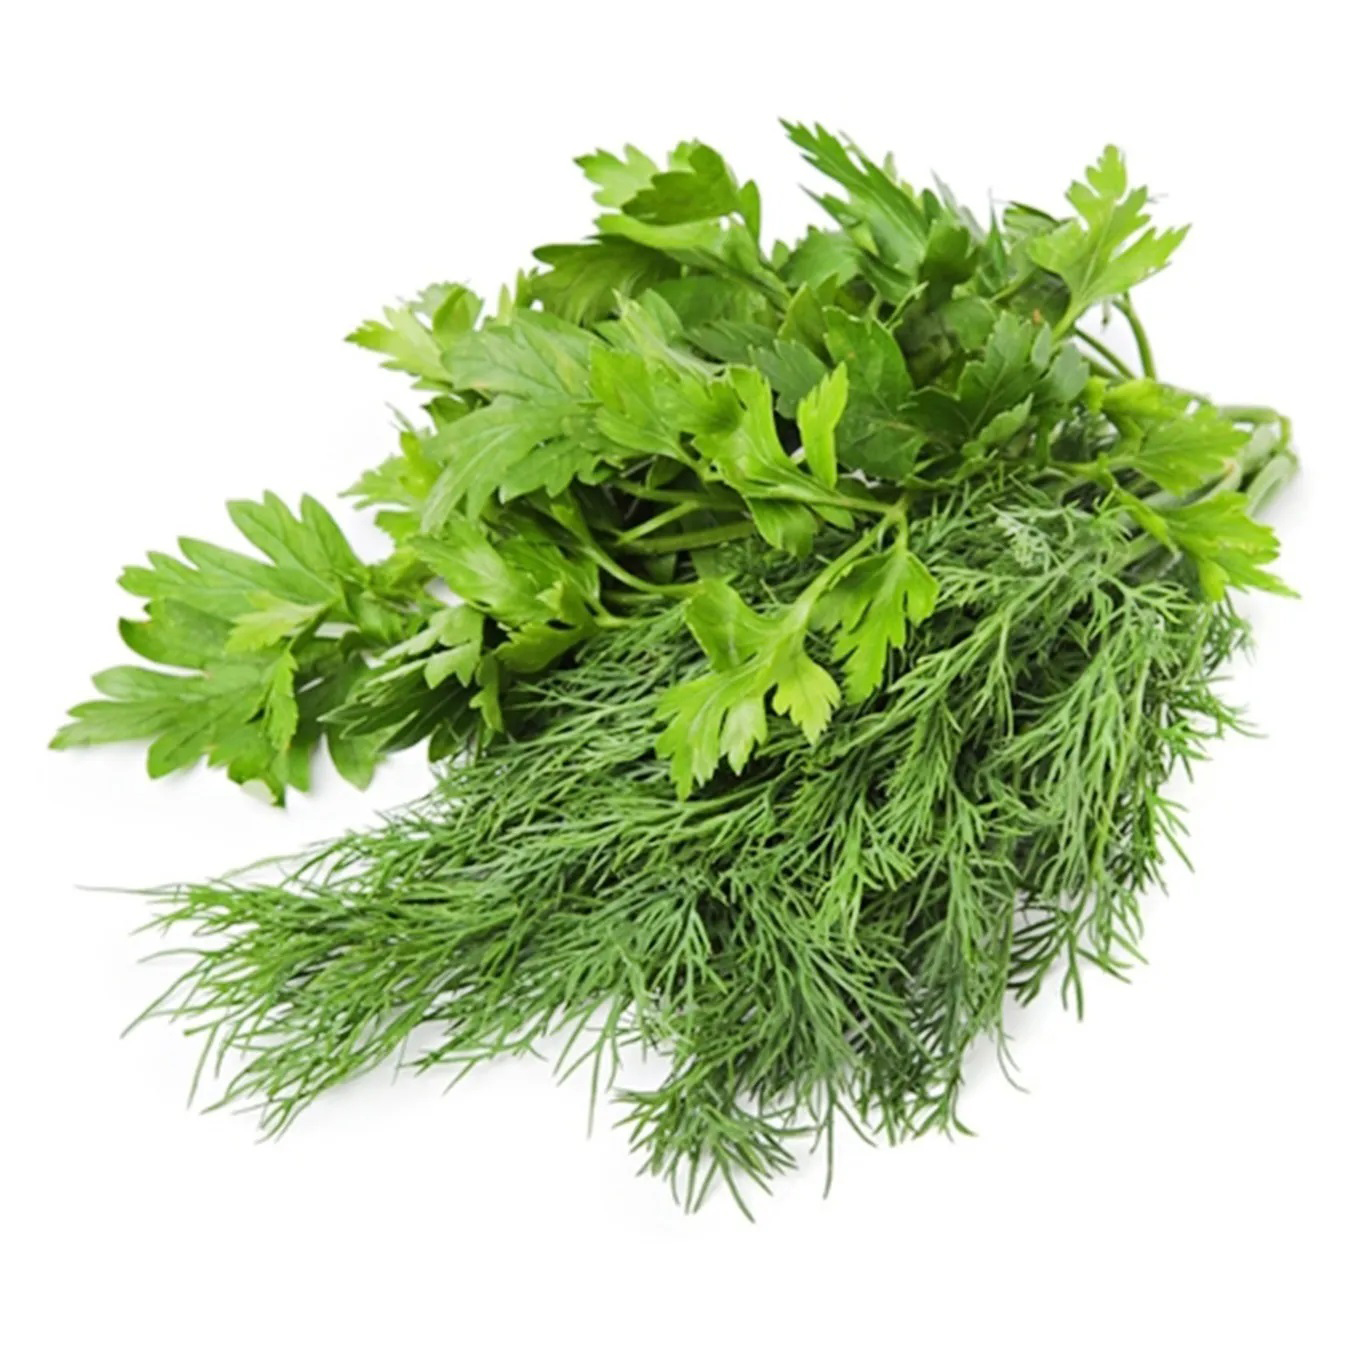 Fresh dill and parsley 100g